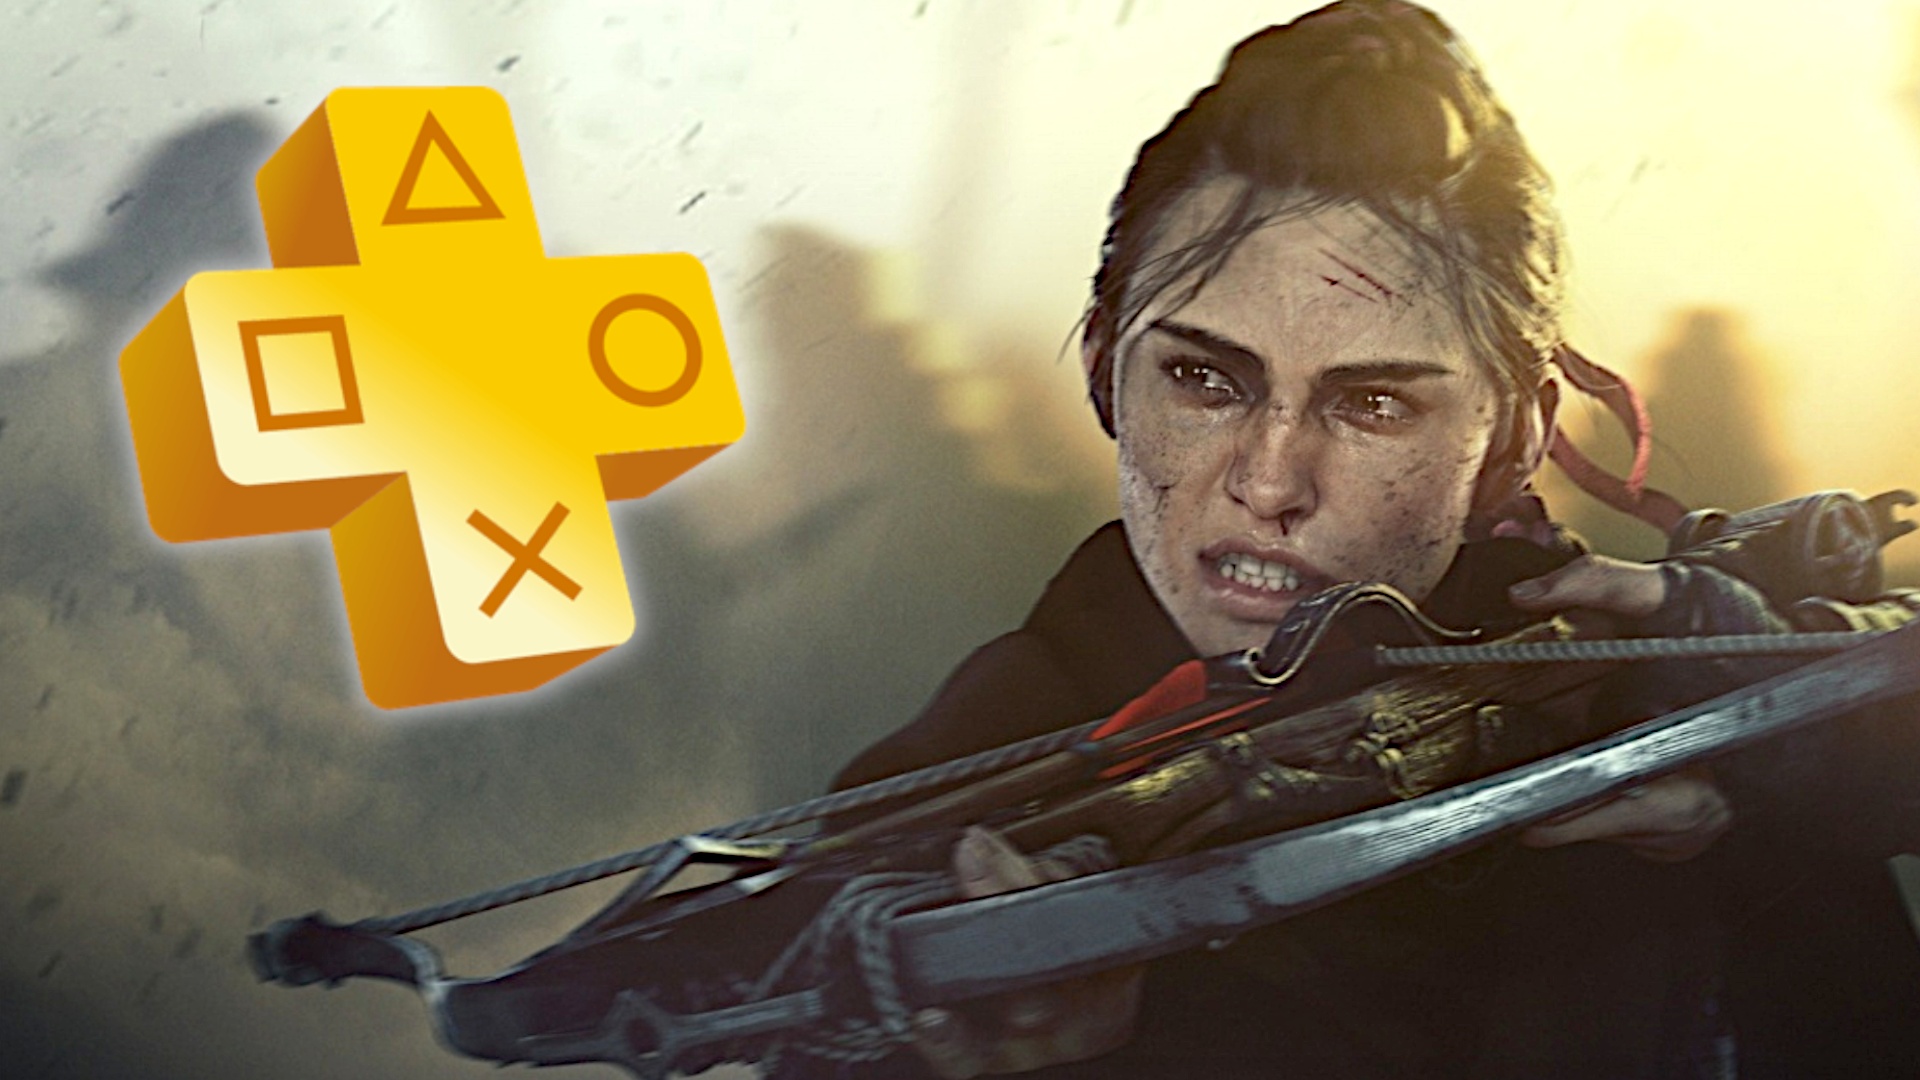 PS Plus will have a story masterpiece for fans of The Last of Us and